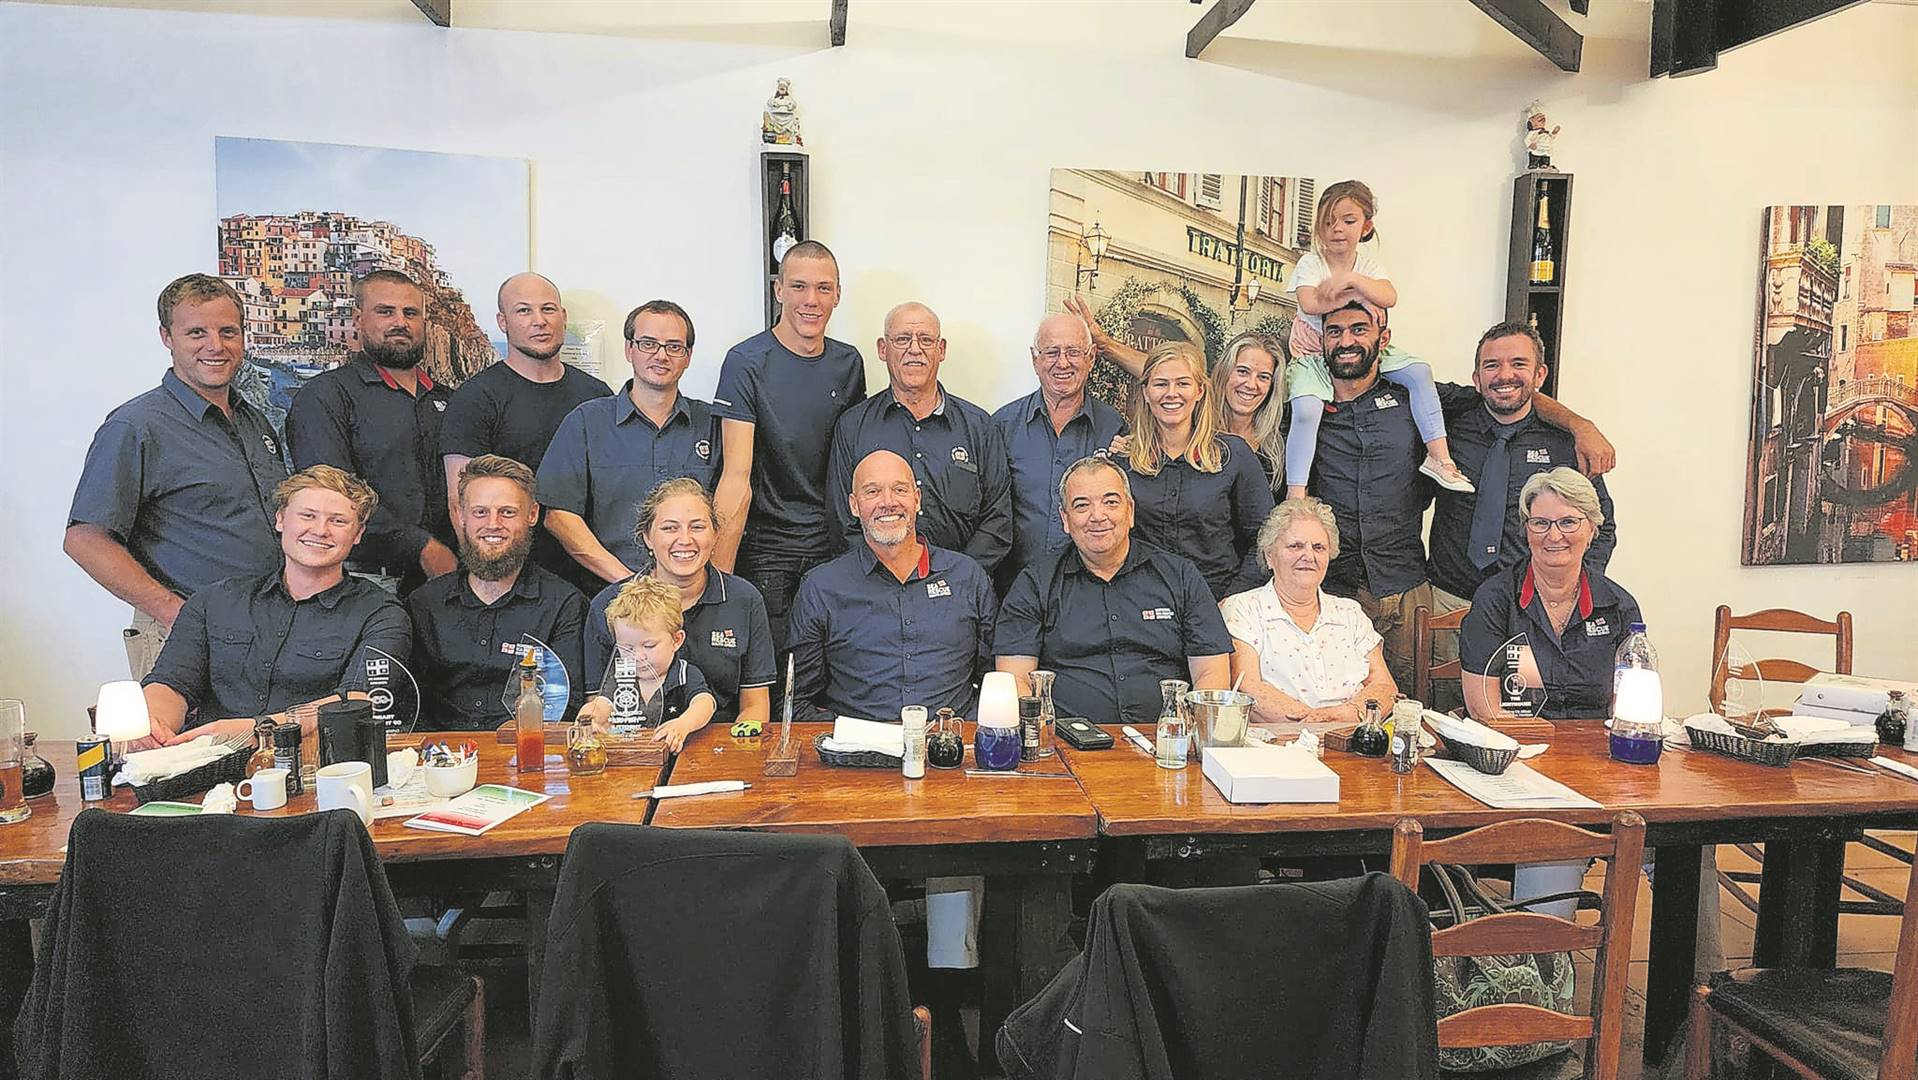 The NSRI Agulhas team with some of their staunchest supporters.